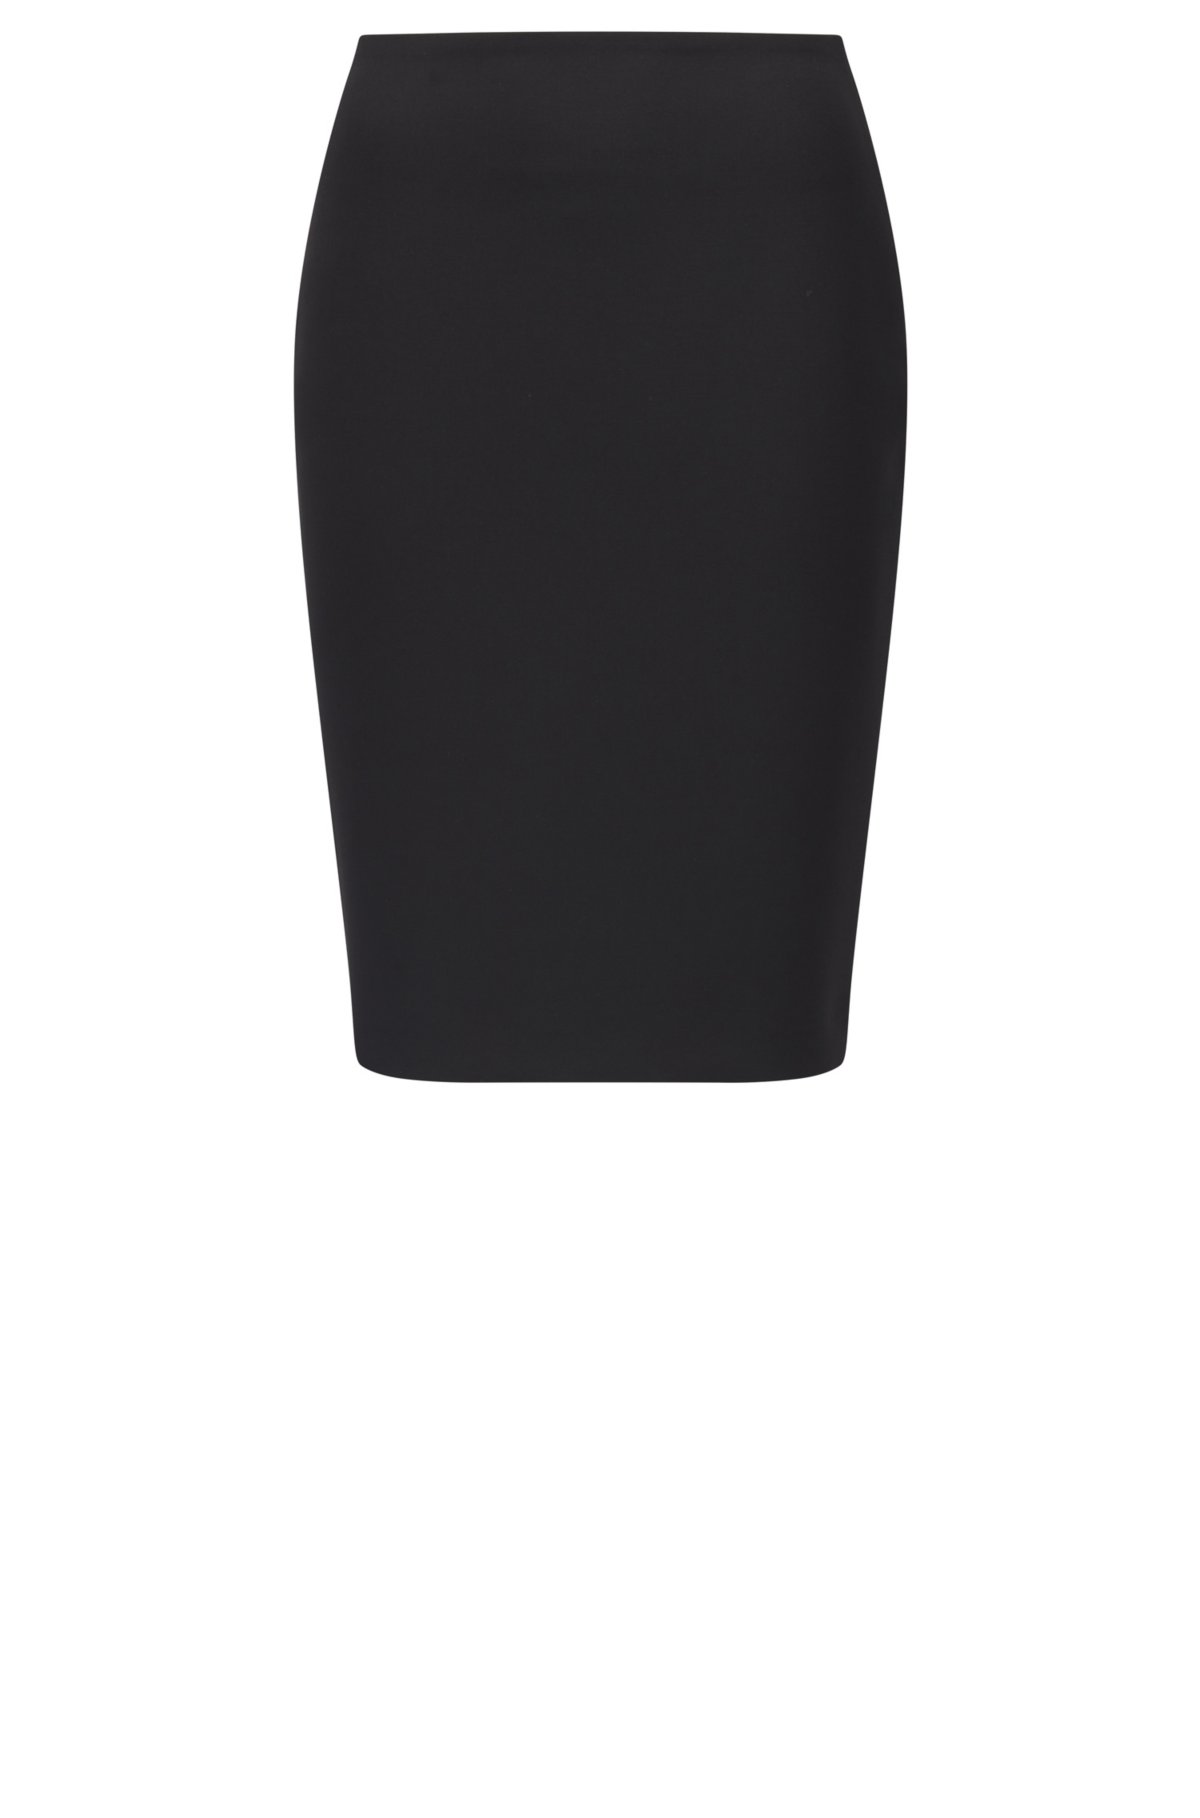 Regular-fit pencil skirt in stretch fabric